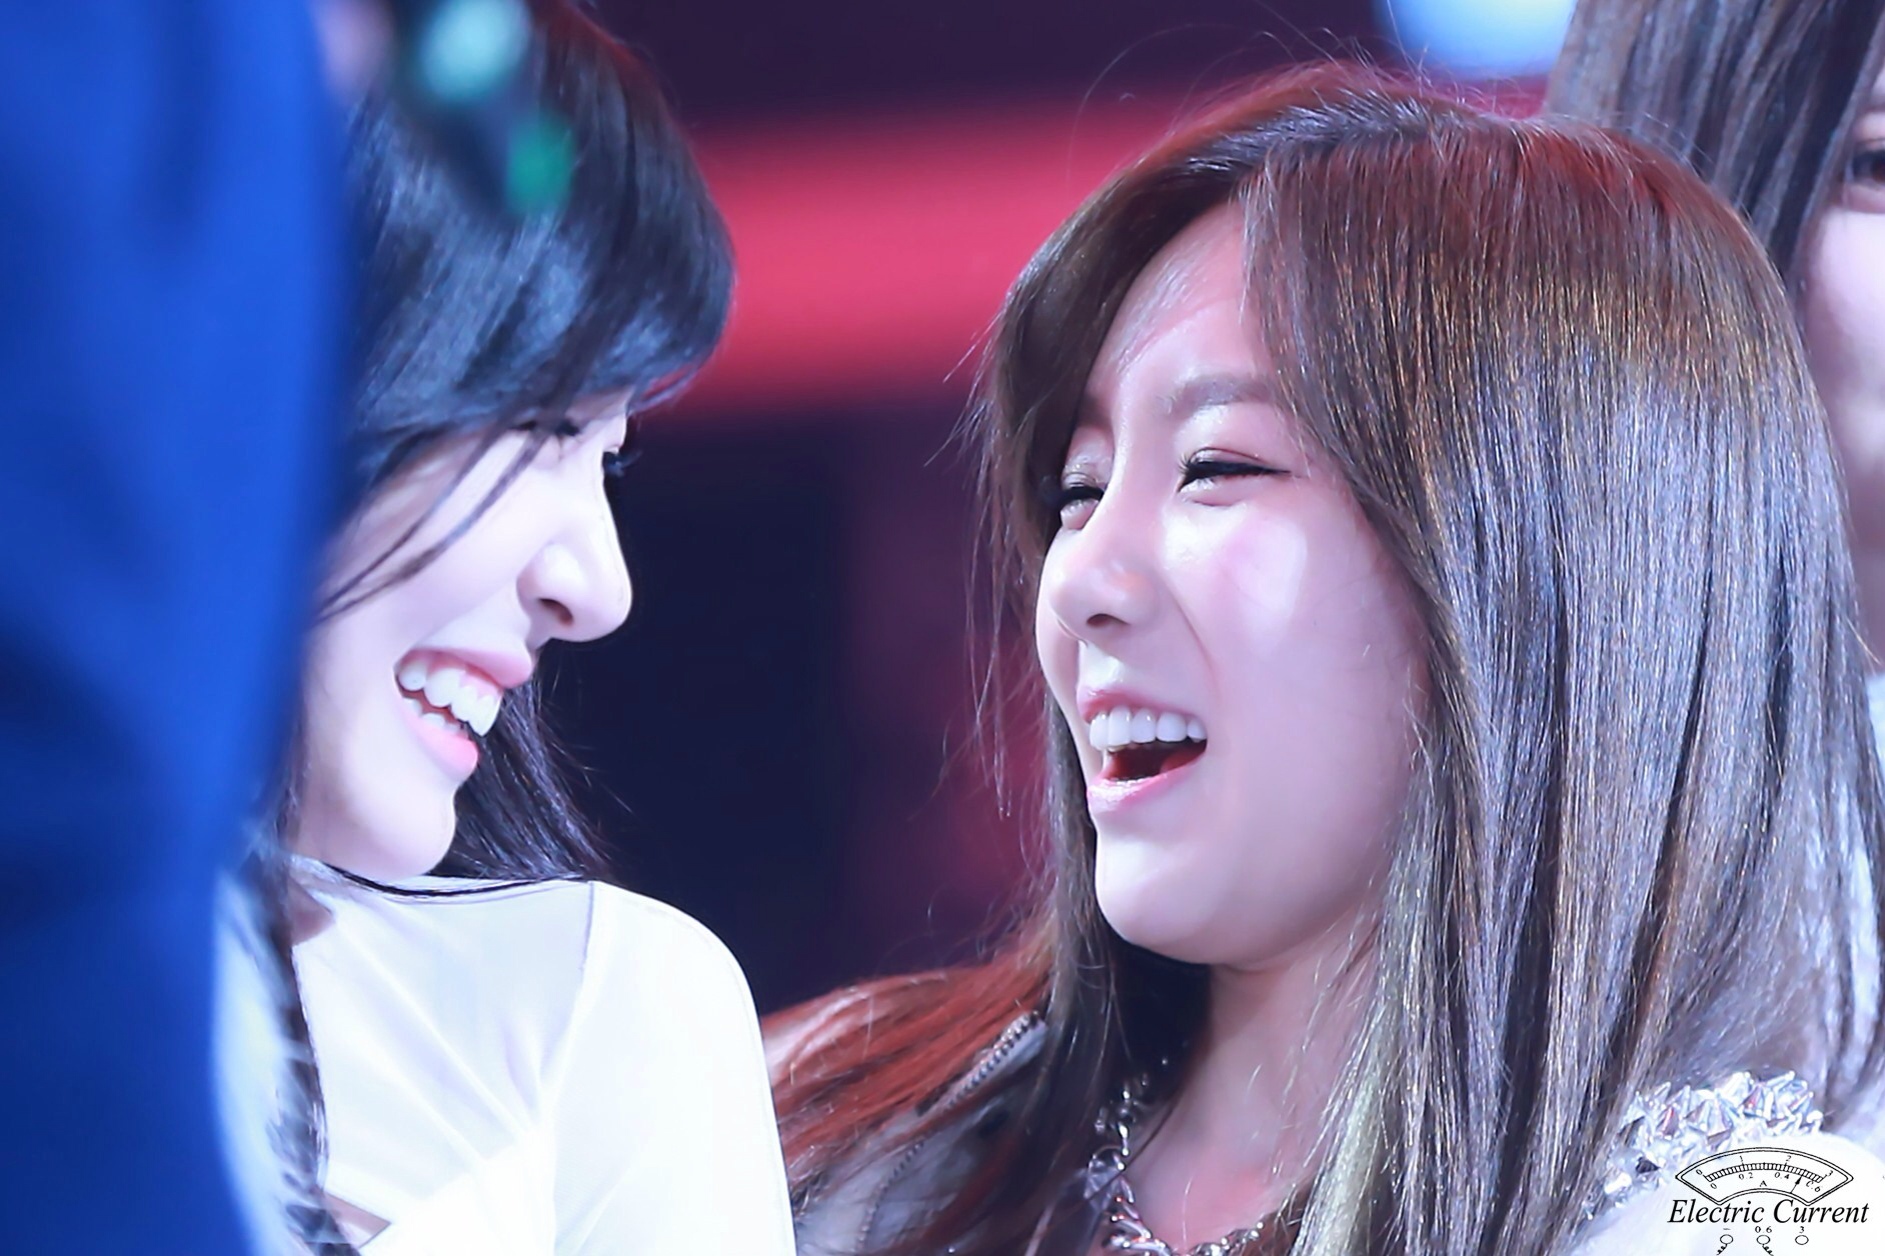 131231 MBC 가요대제전 티파니 직찍 by Electric Current, Shining Smile